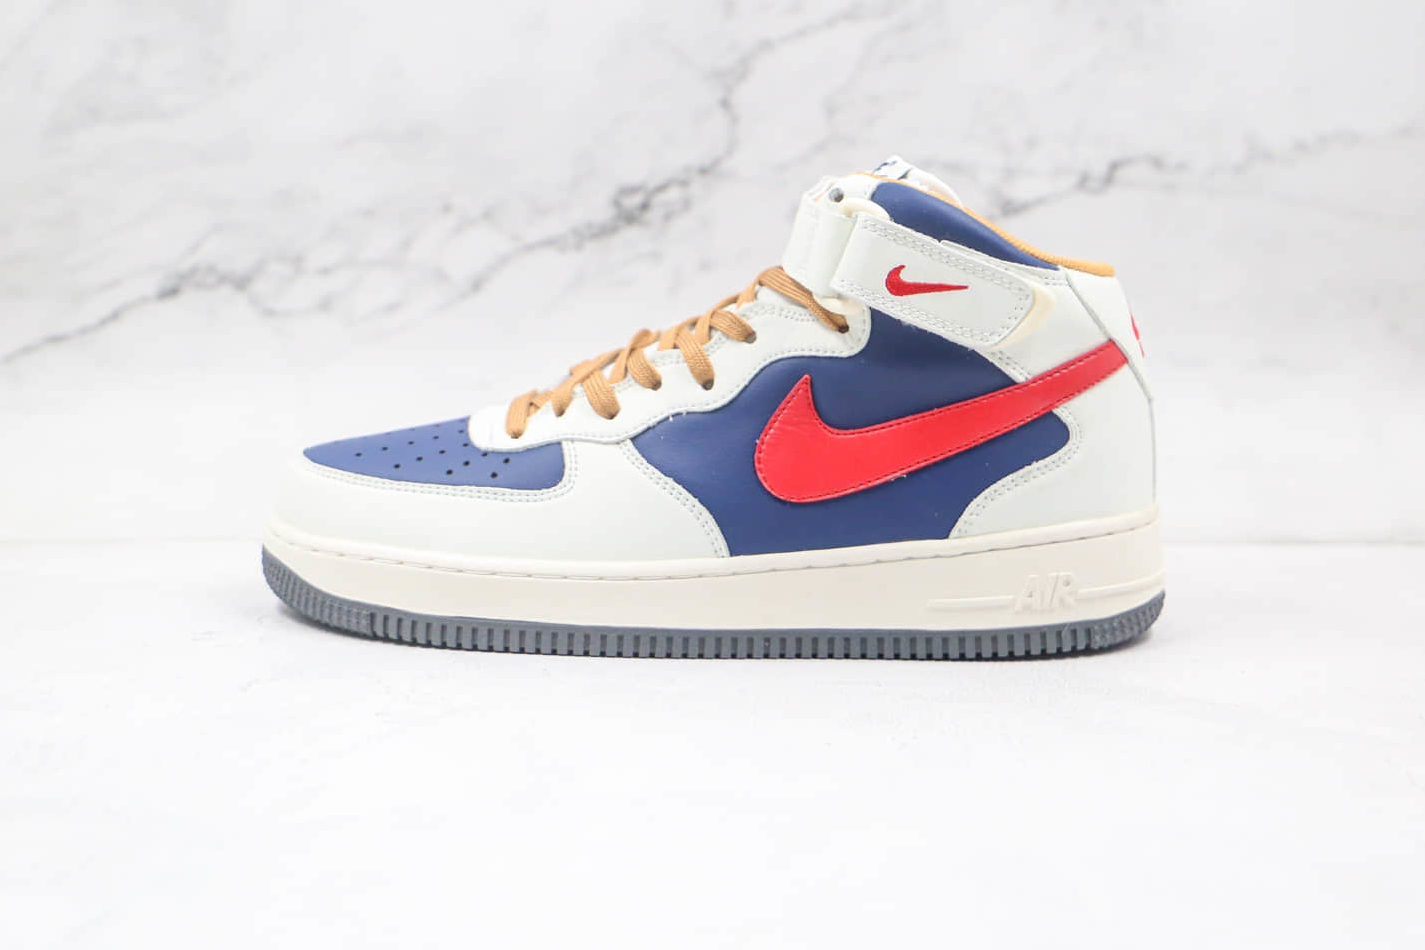 Nike Air Force 1 07 Mid Beige Dark Blue University Red 512745-068 – Classic Style with Vibrant Colors